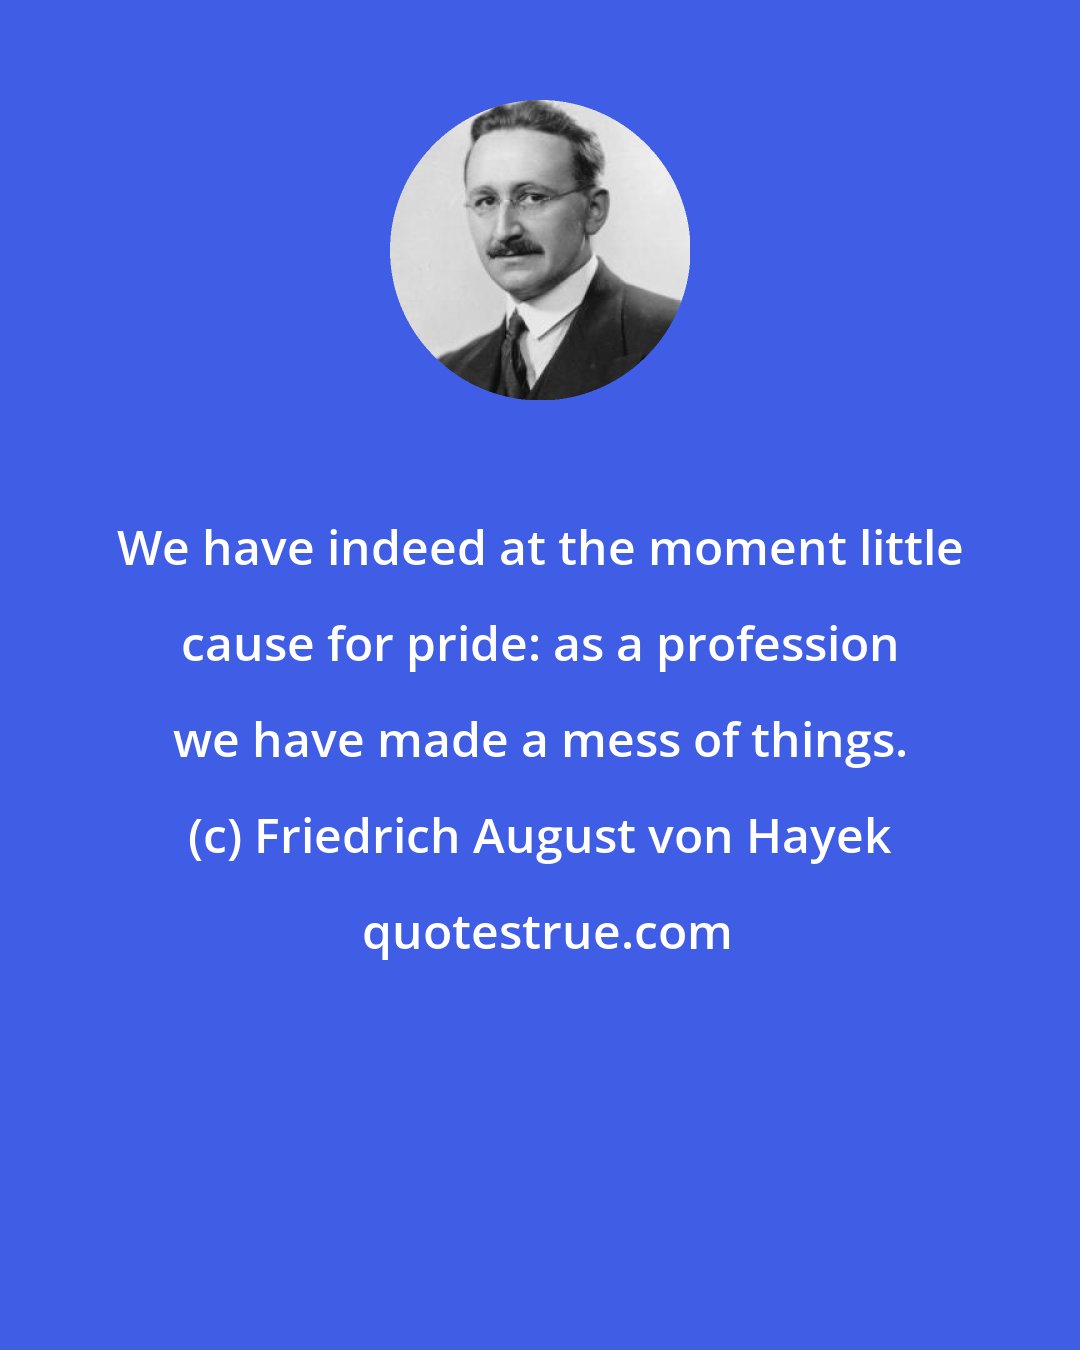 Friedrich August von Hayek: We have indeed at the moment little cause for pride: as a profession we have made a mess of things.